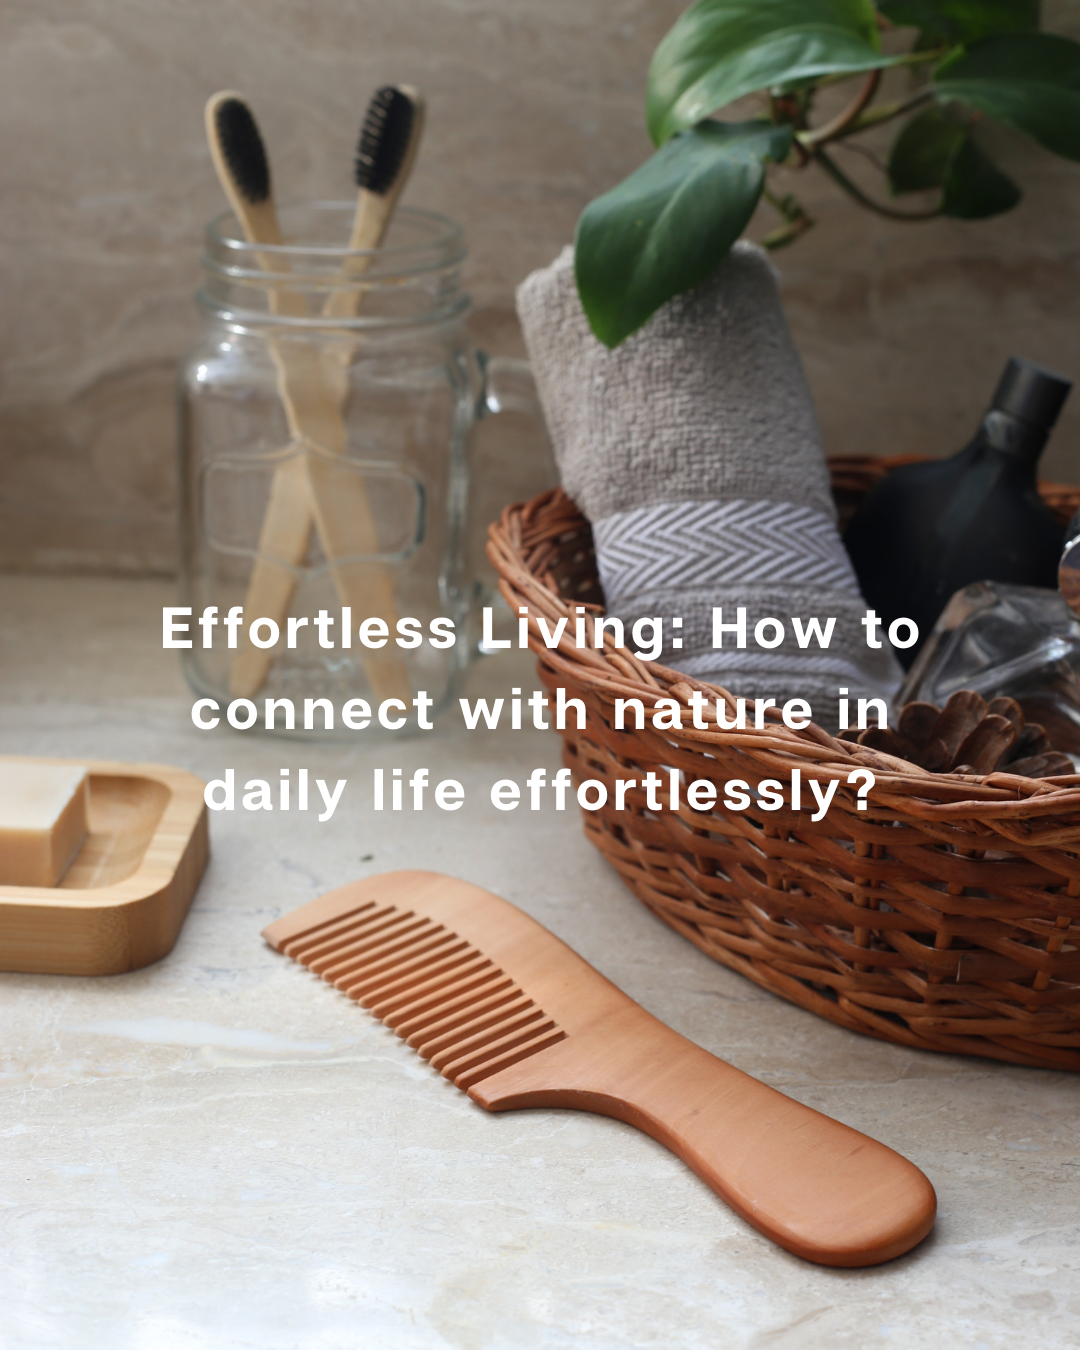 Effortless Living: How to connect with nature in daily life effortlessly?